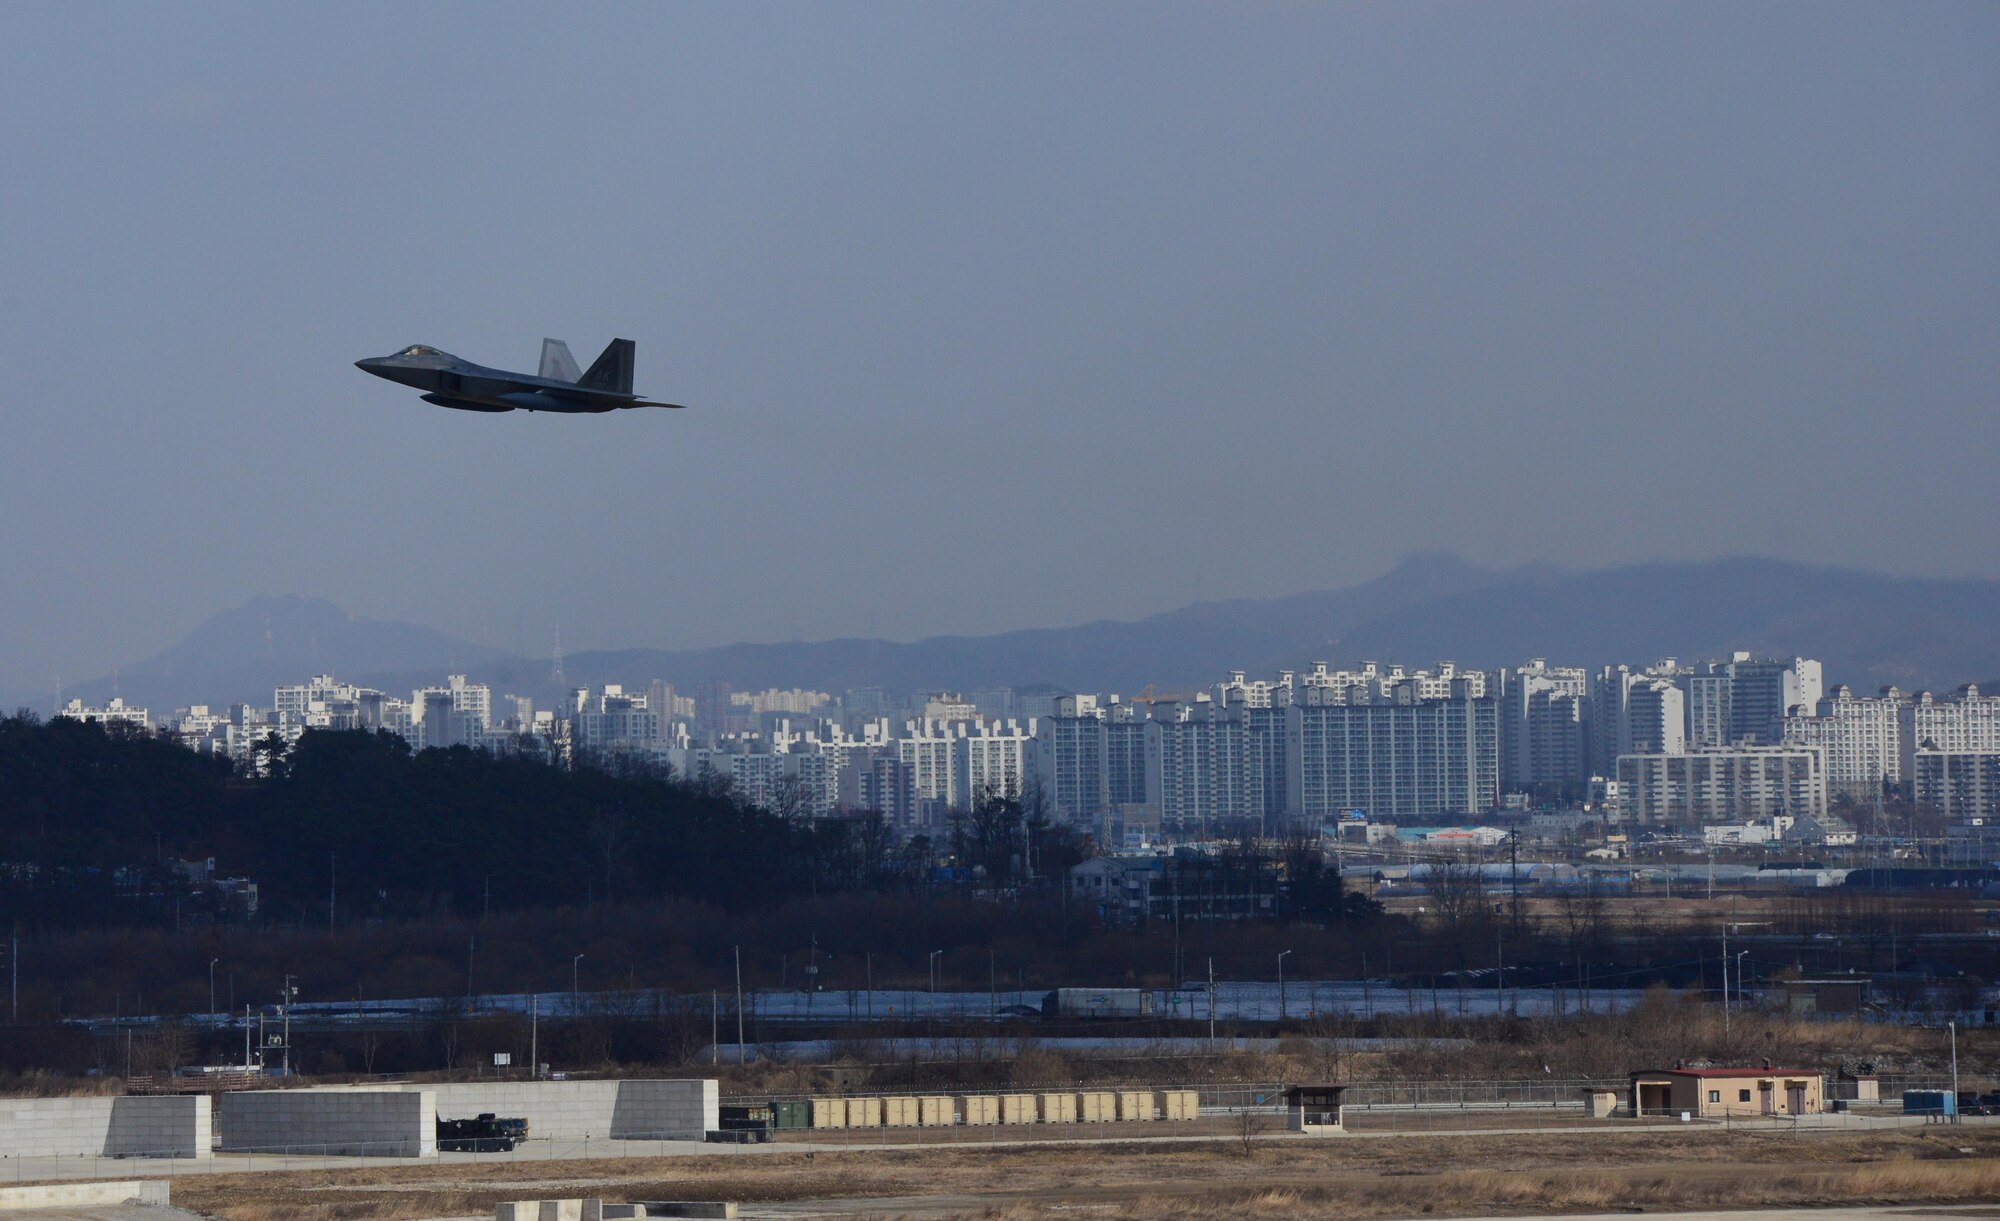 A U.S. Air Force F-22 "Raptor" fighter aircraft from Kadena Air Base, Japan, conducted a flyover in the vicinity of Osan Air Base, South Korea, in response to recent provocative action by North Korea Feb. 17, 2016. Four Raptors were joined by four F-15 Slam Eagles and U.S. Air Force F-16 Fighting Falcons. The F-22 is designed to project air dominance rapidly and at great distances and currently cannot be matched by any known or projected fighter aircraft.  
(U.S. Air Force photo by Staff Sgt. Amber Grimm/Released)